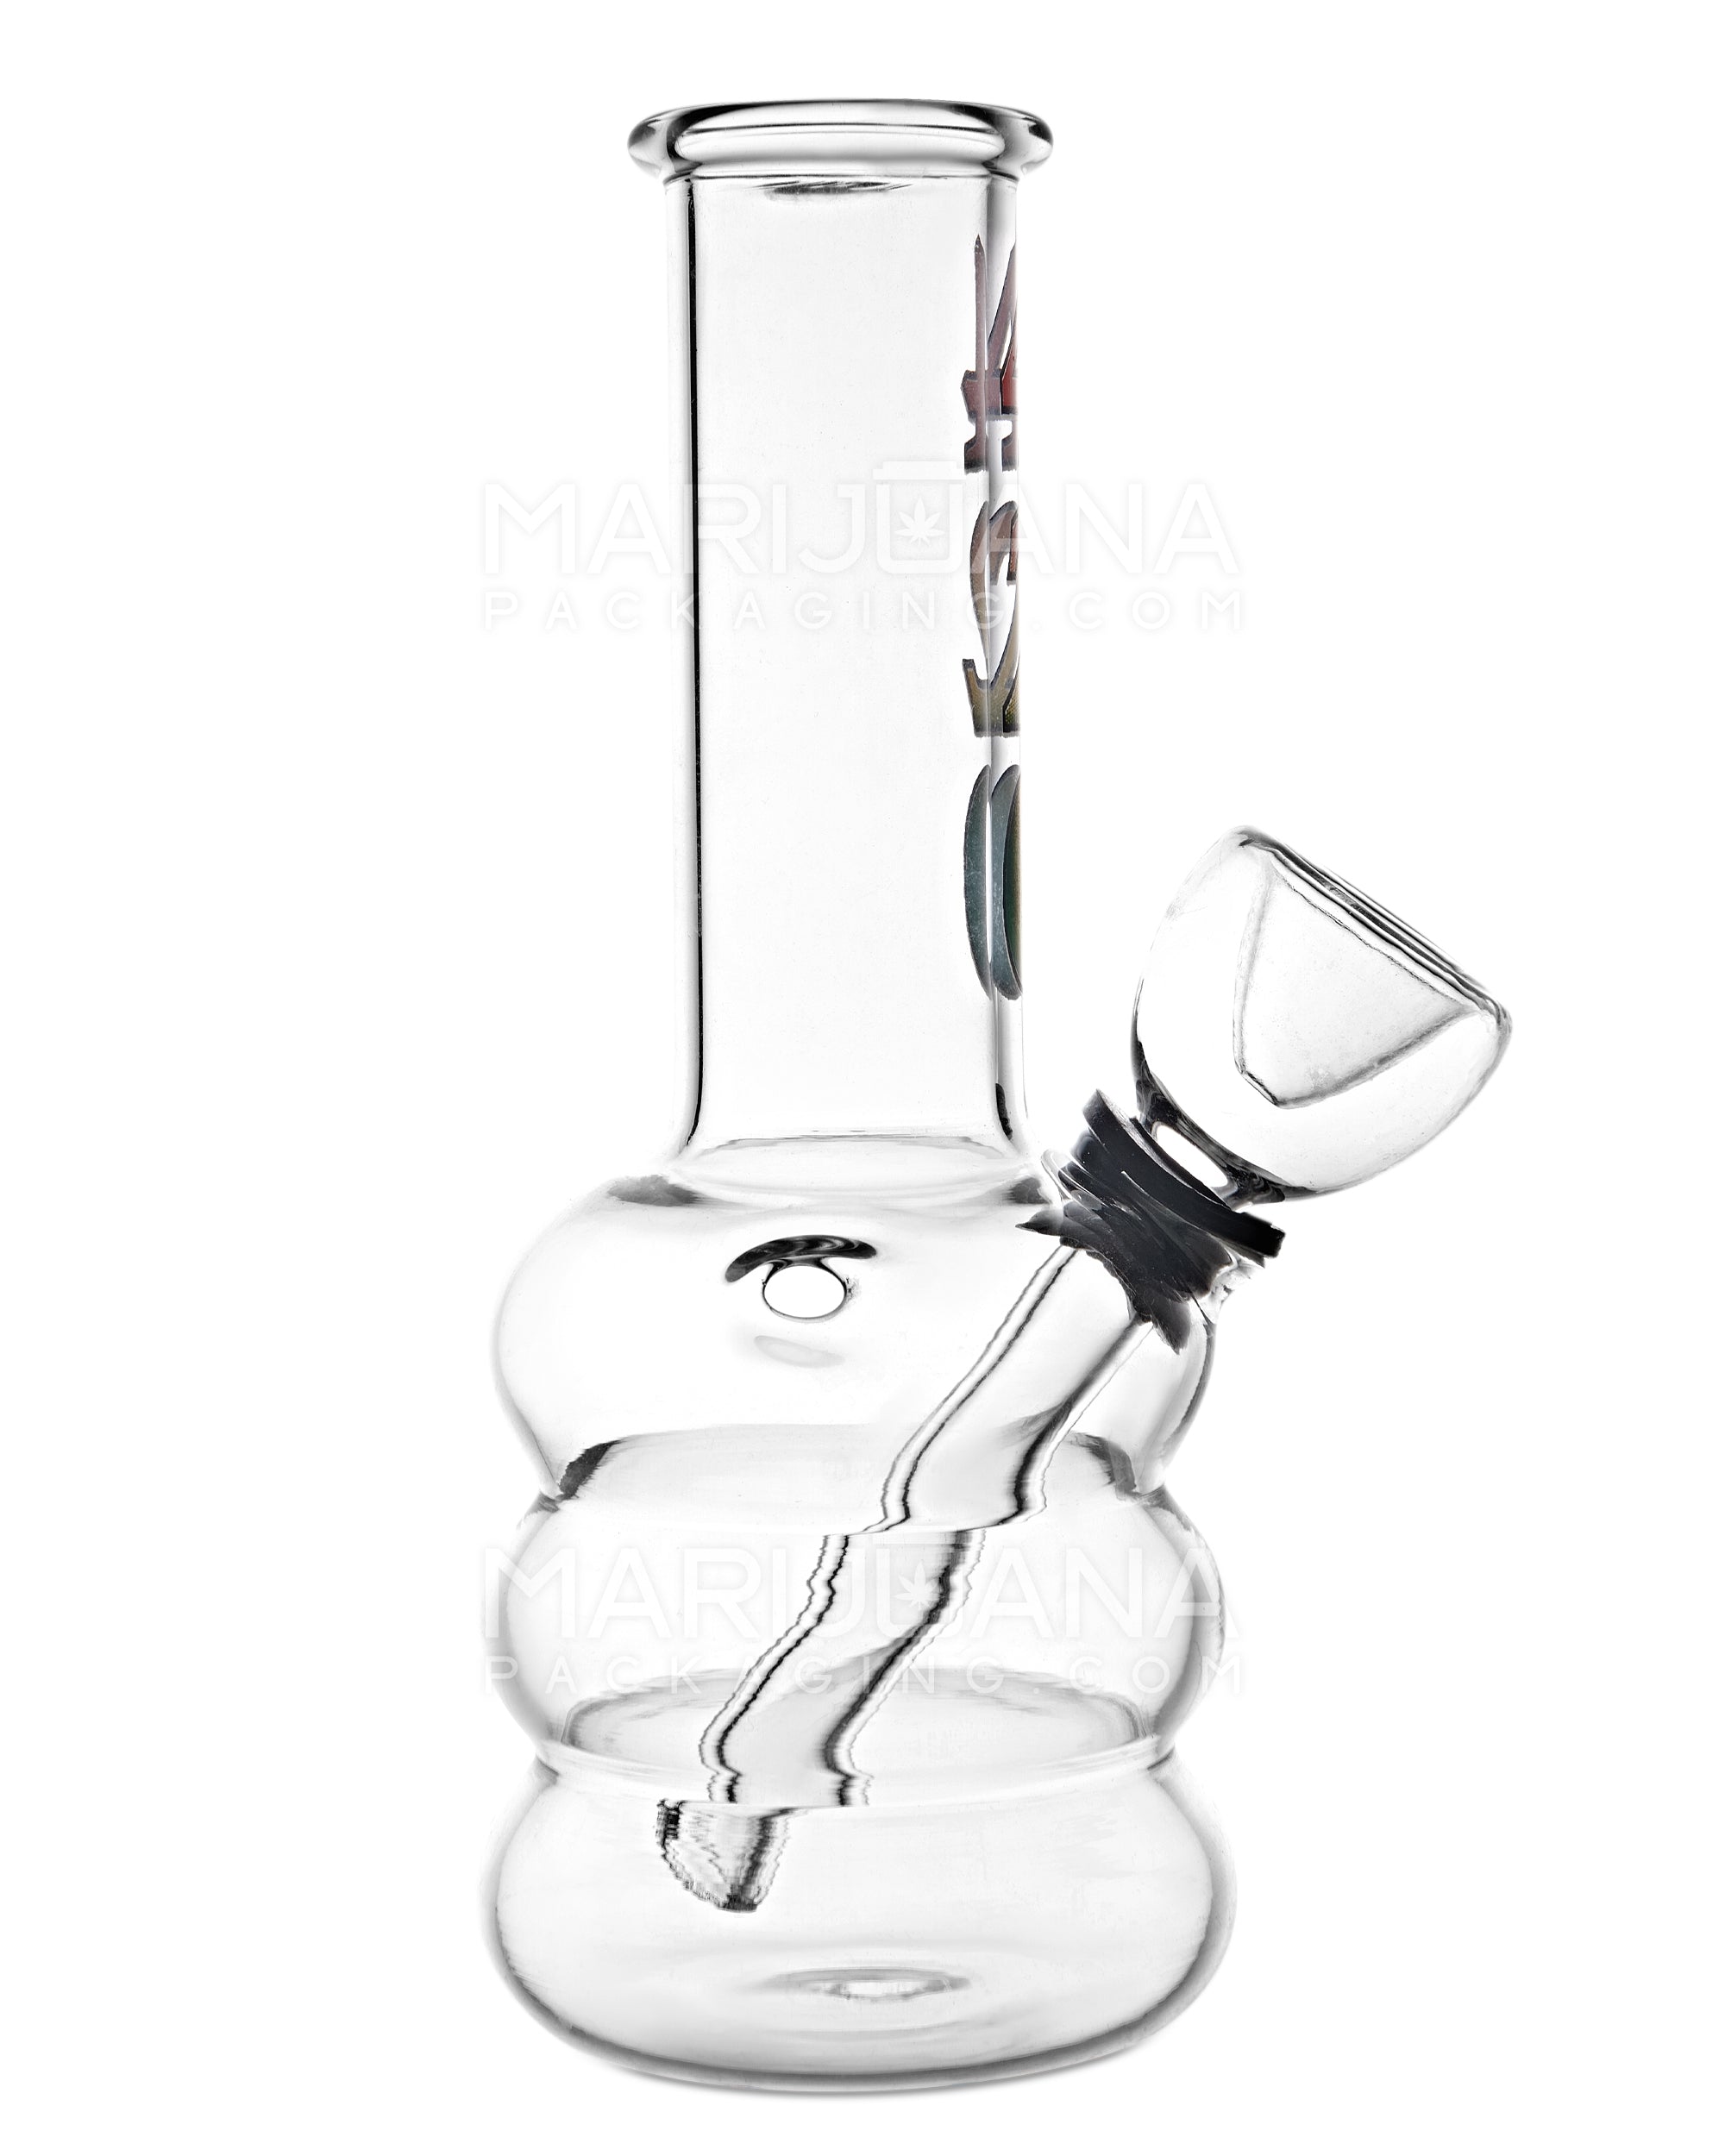 Straight Neck 420 Decal Glass Egg Water Pipe | 5in Tall - Grommet Bowl - Clear - 1